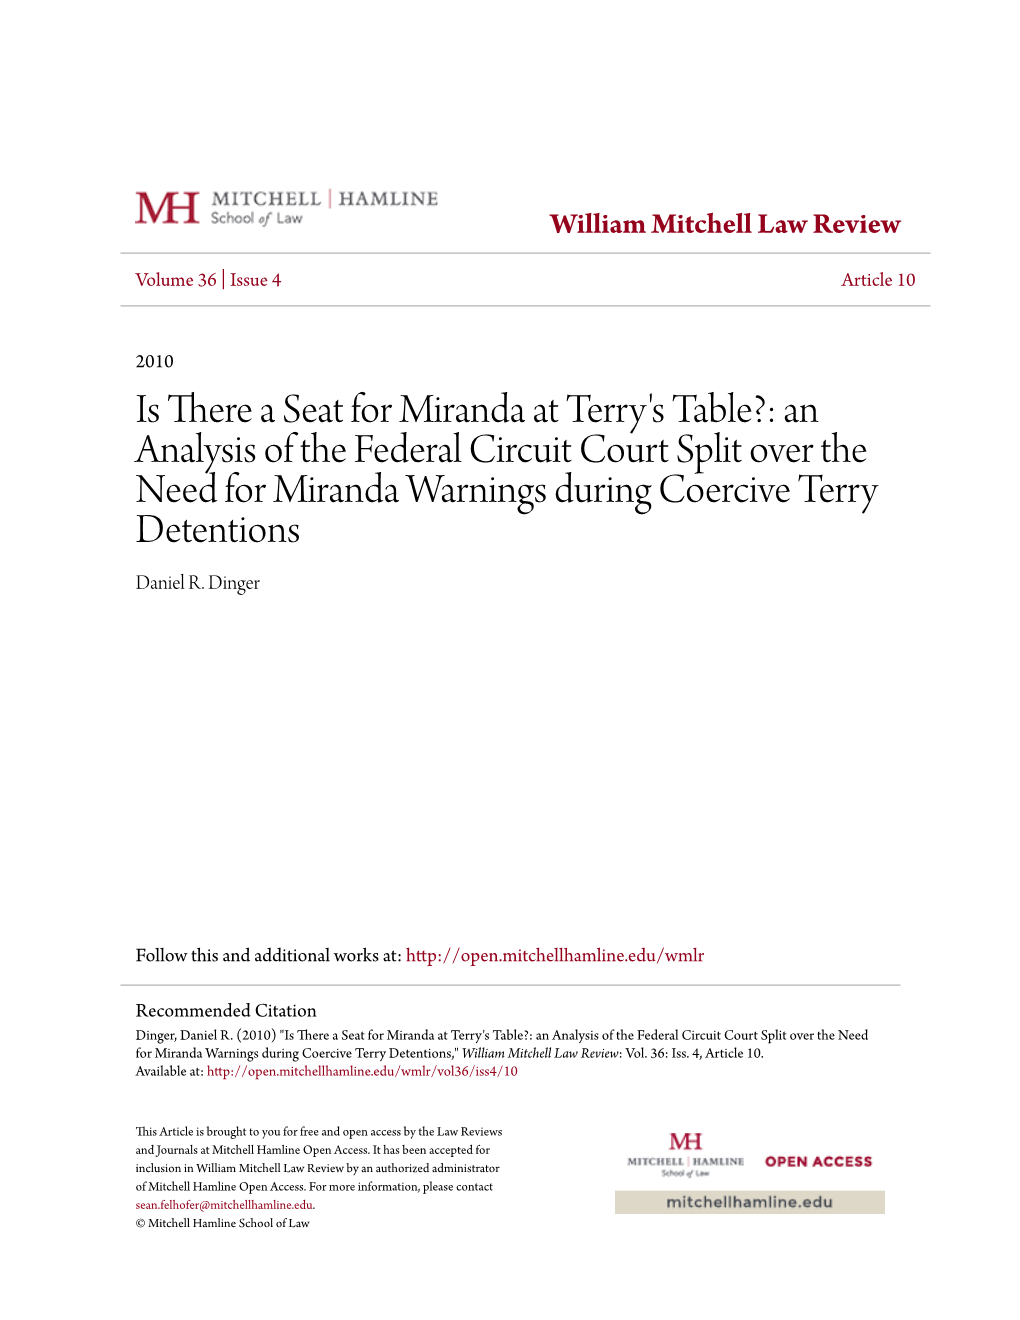 Is There a Seat for Miranda at Terry's Table?